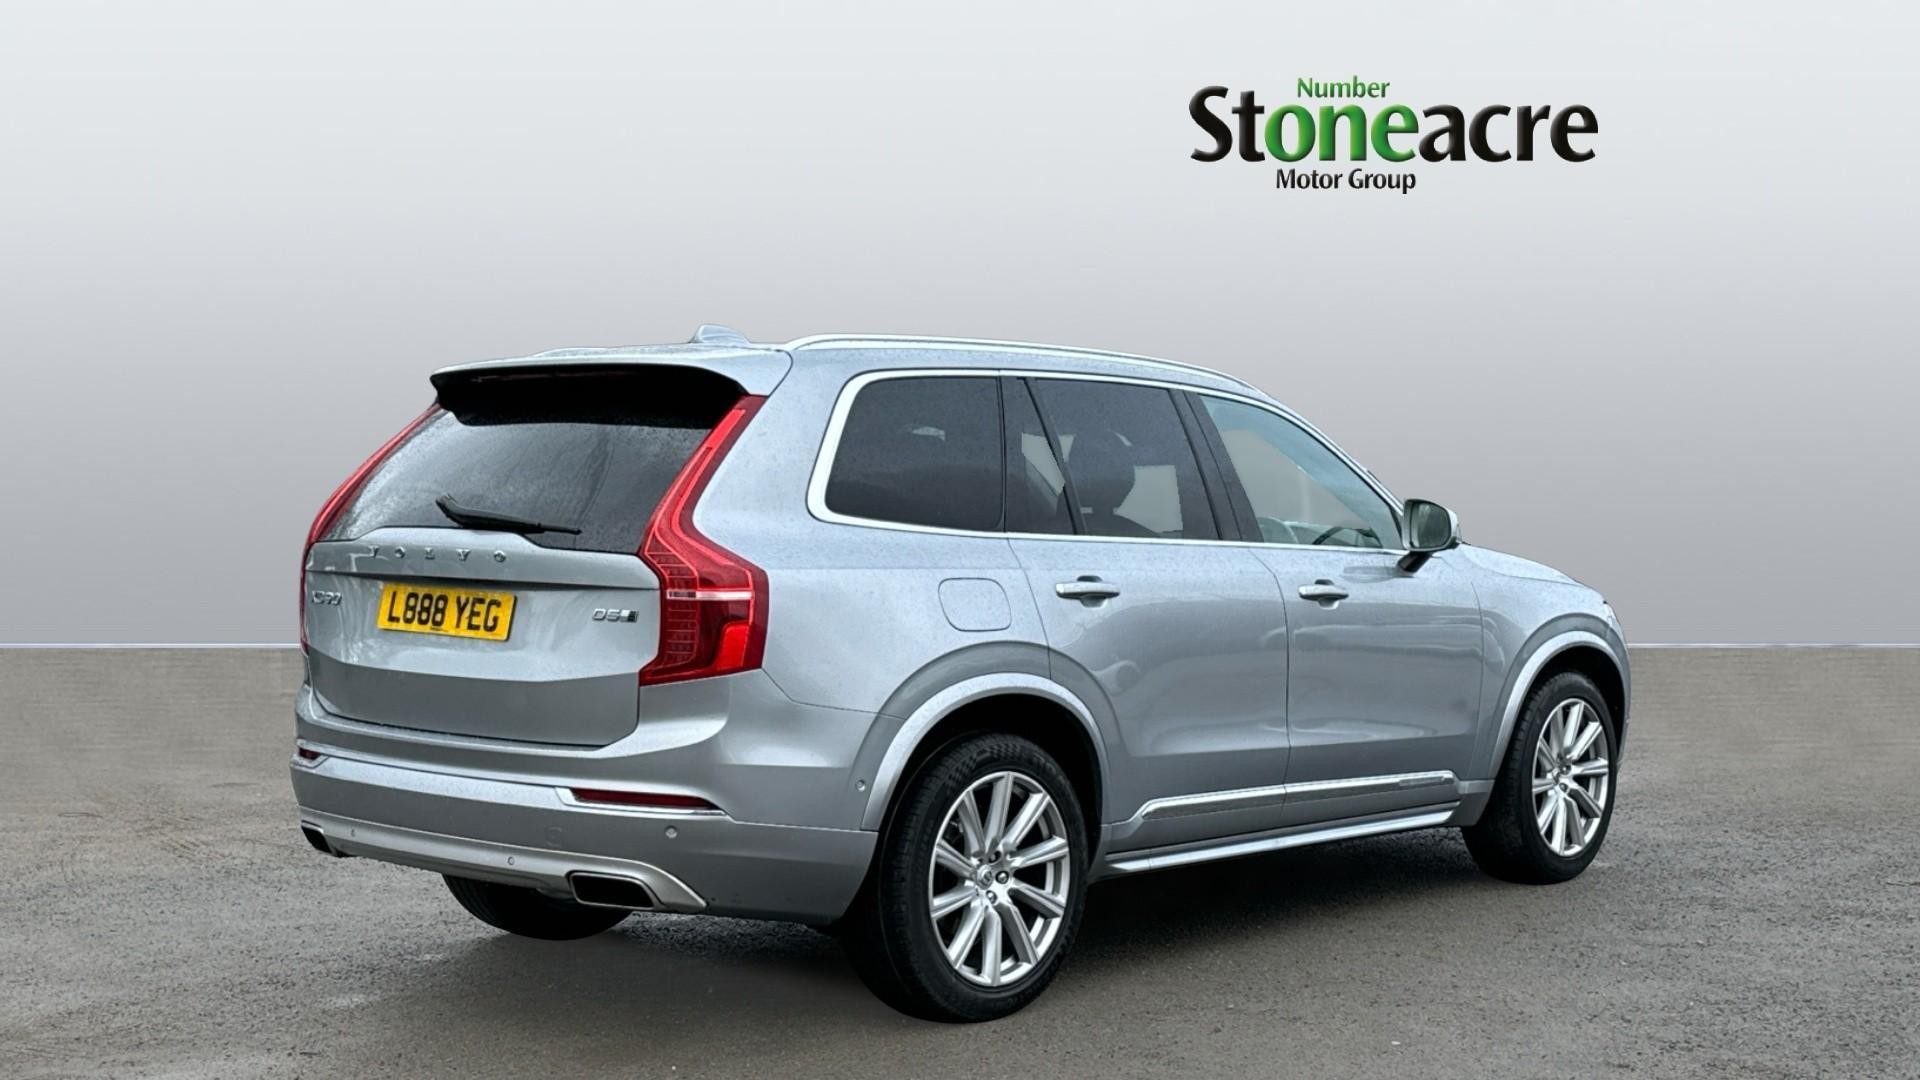 Volvo XC90 2.0 D5 Inscription 5dr AWD Geartronic (L888YEG) image 6